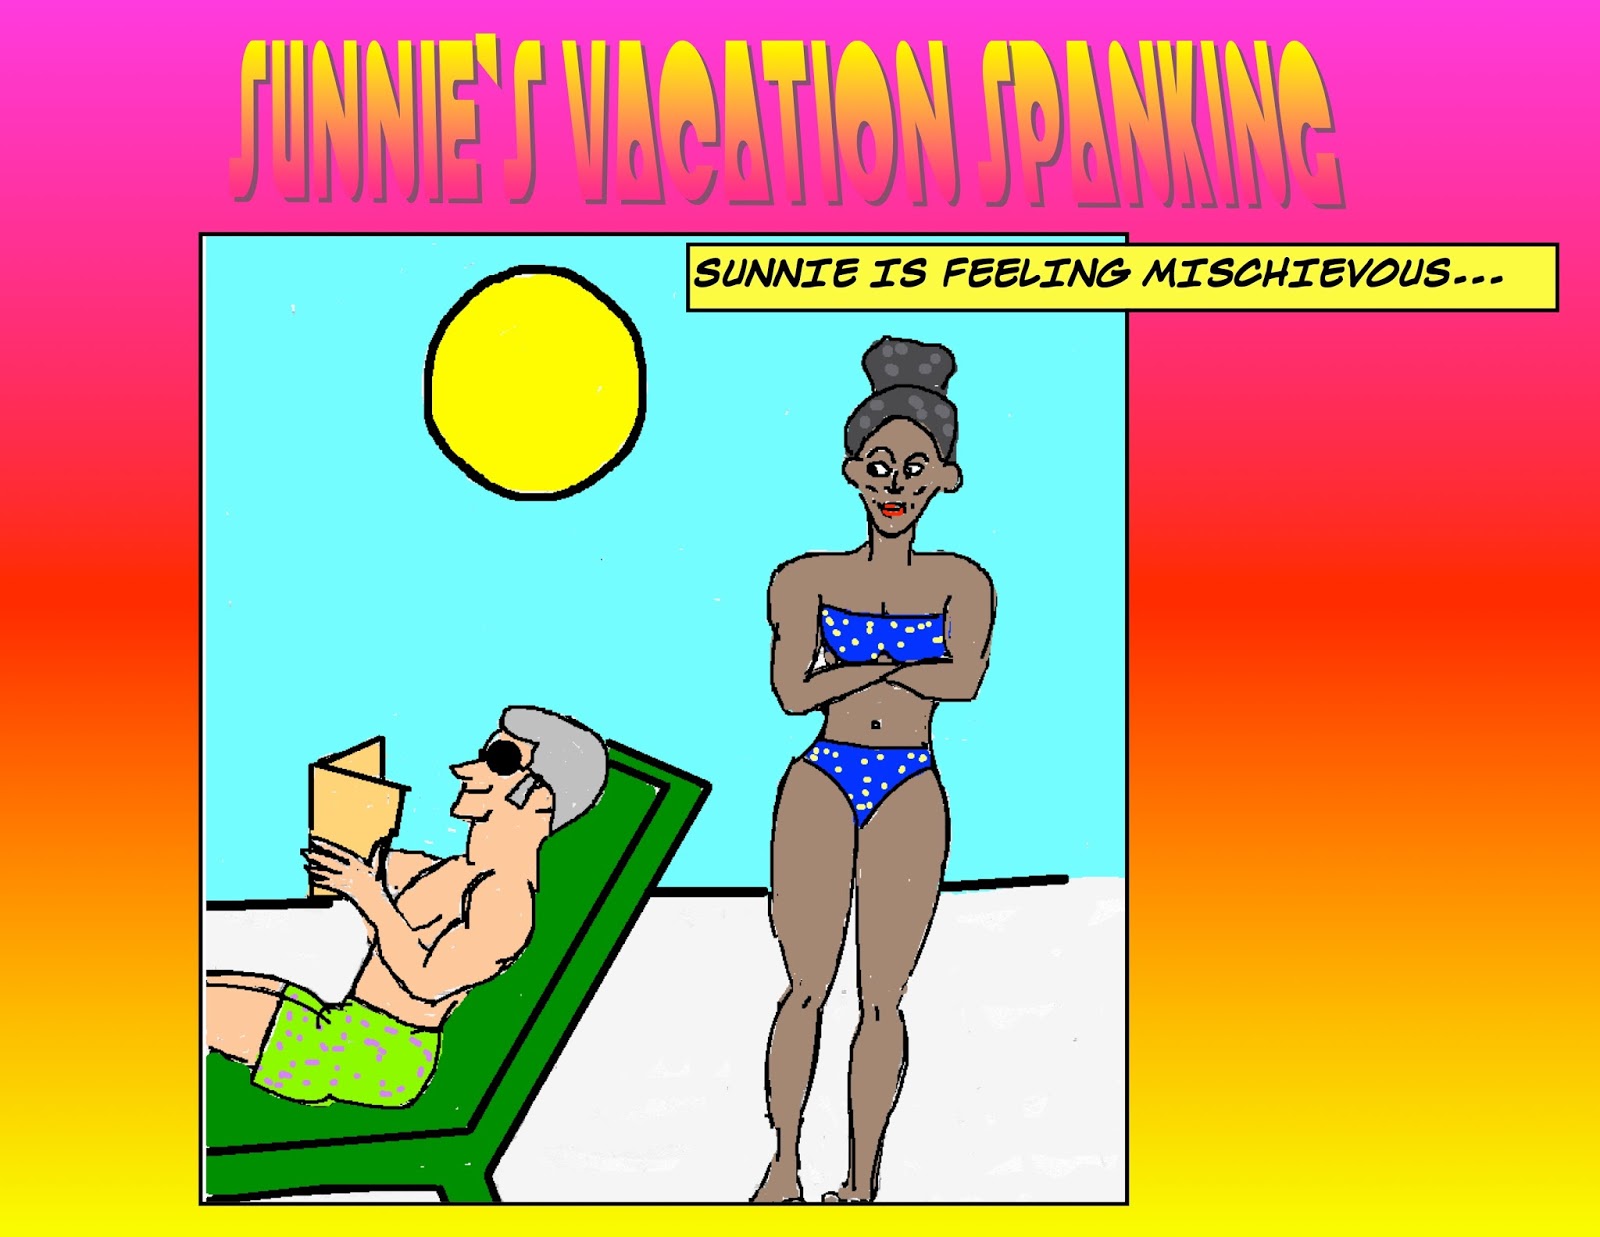 Glenmore's Adult Spanking Stories & Art: Sunnie's Vacation ...